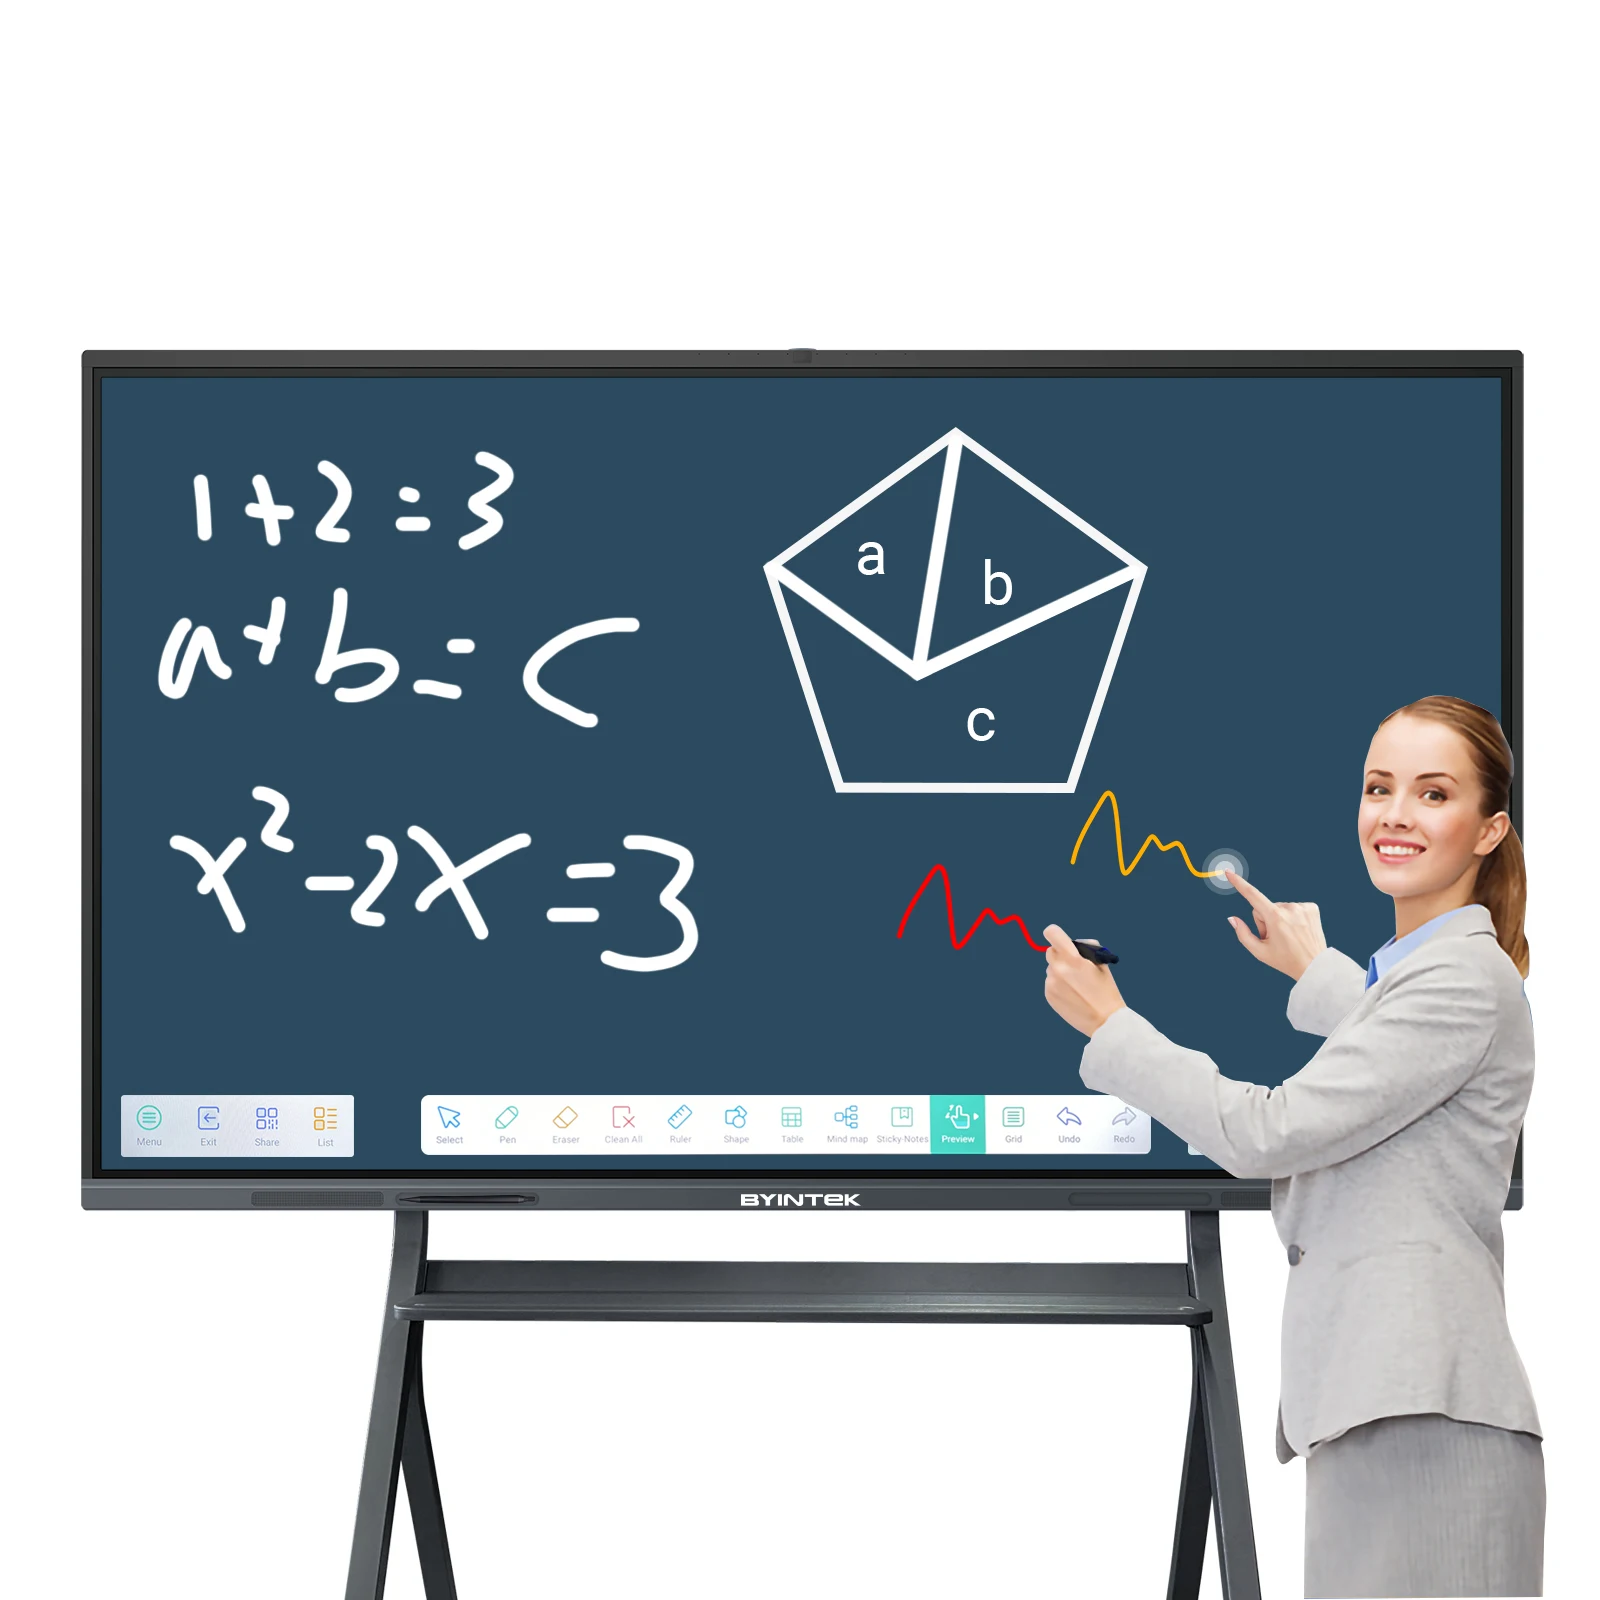 

BYINTK 75inch 4K Digital Boards intelligent electronic whiteboard and conference all-in-one touch screen teaching Whiteboard